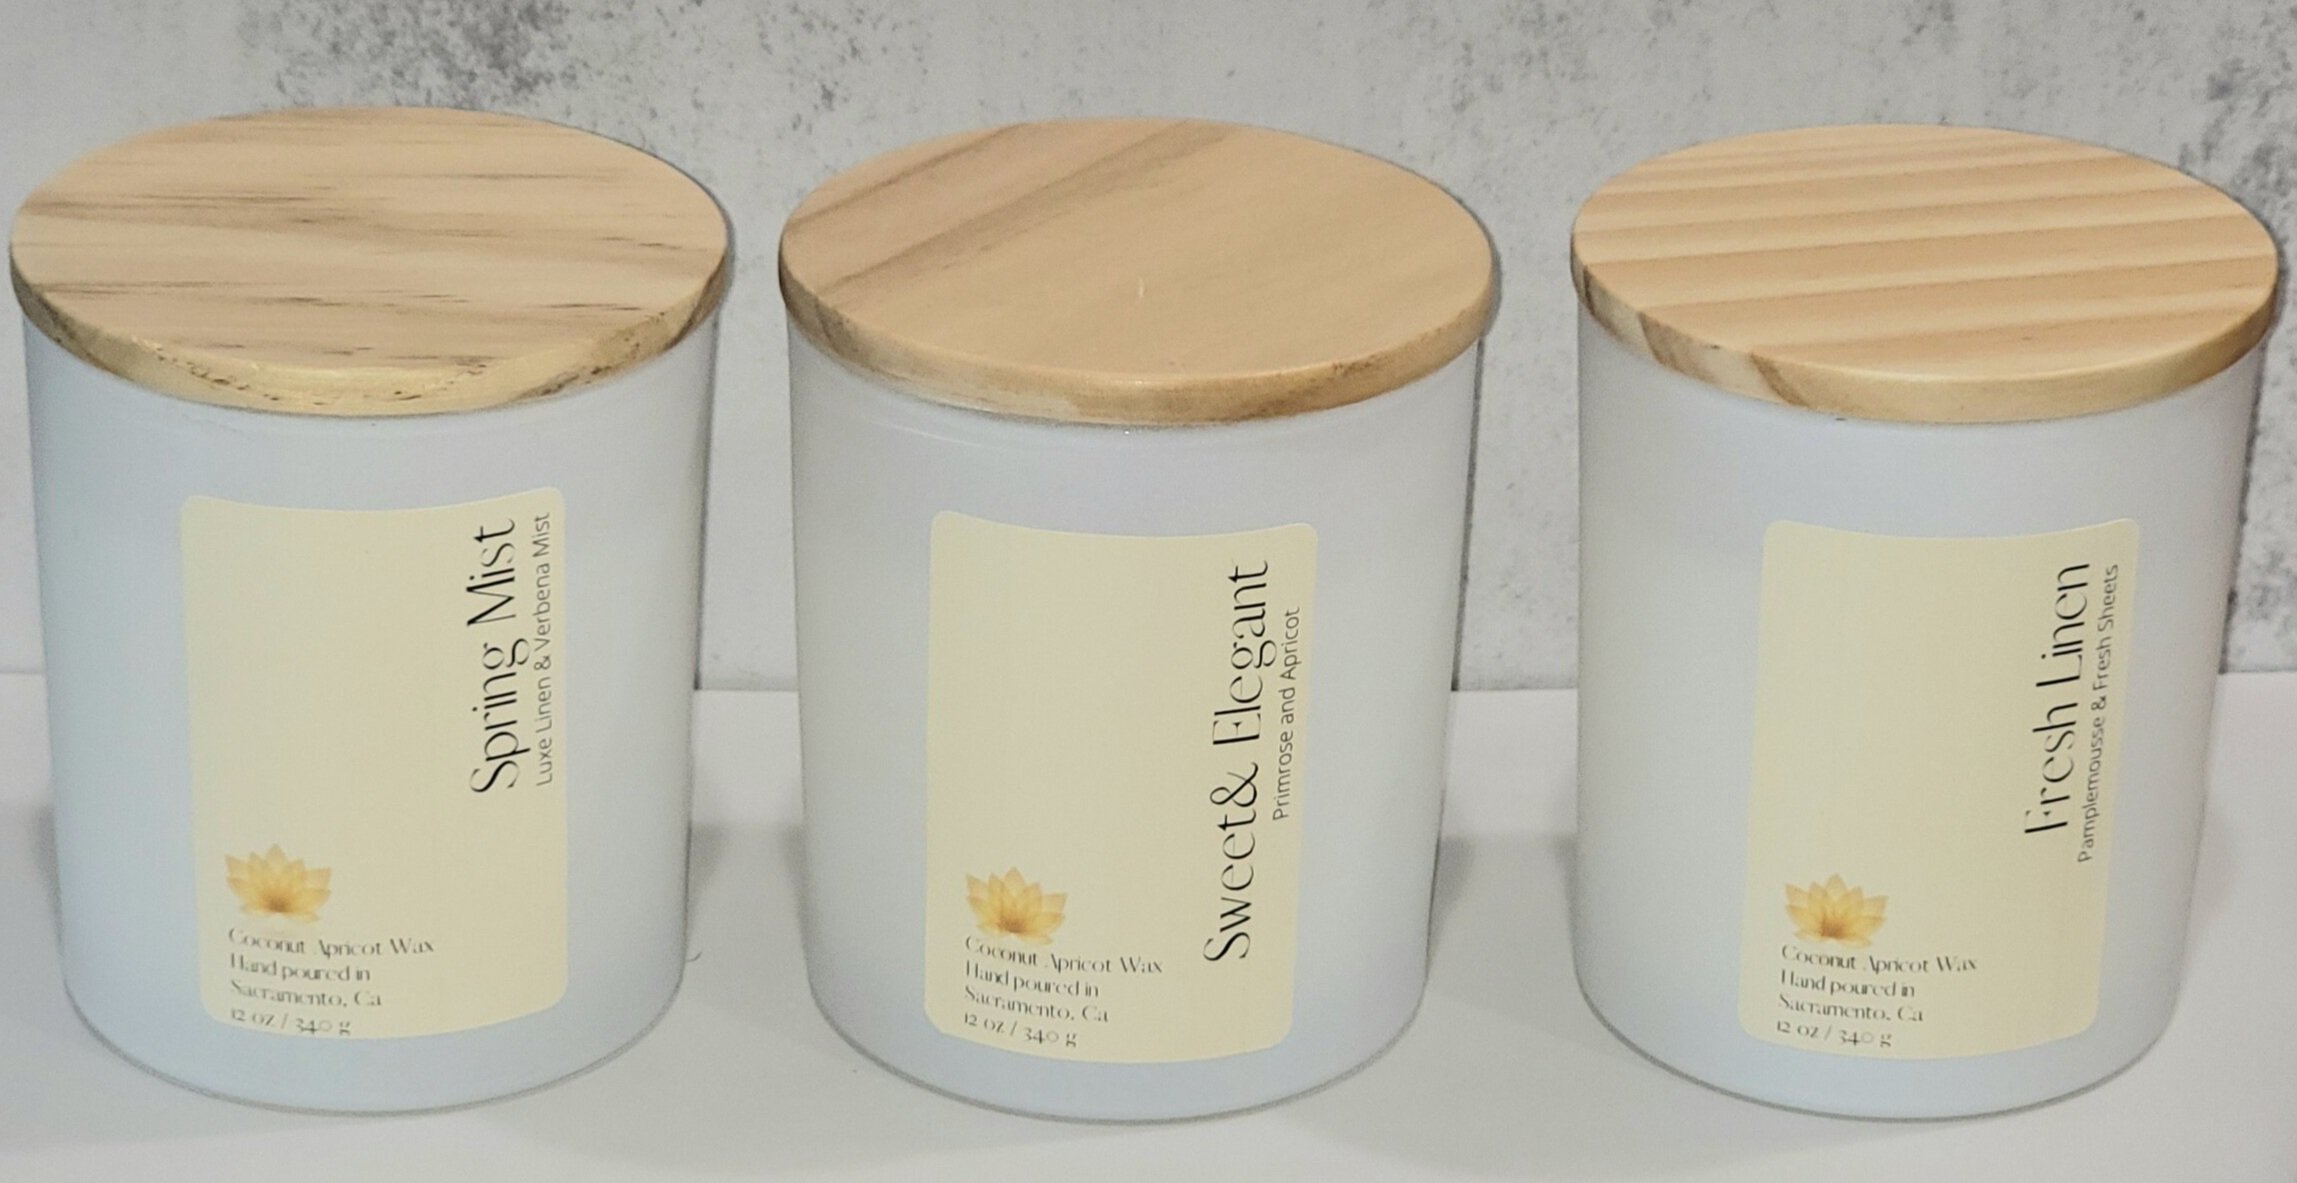 Fresh Linen Breeze Naturally Scented Candle – Plant Therapy